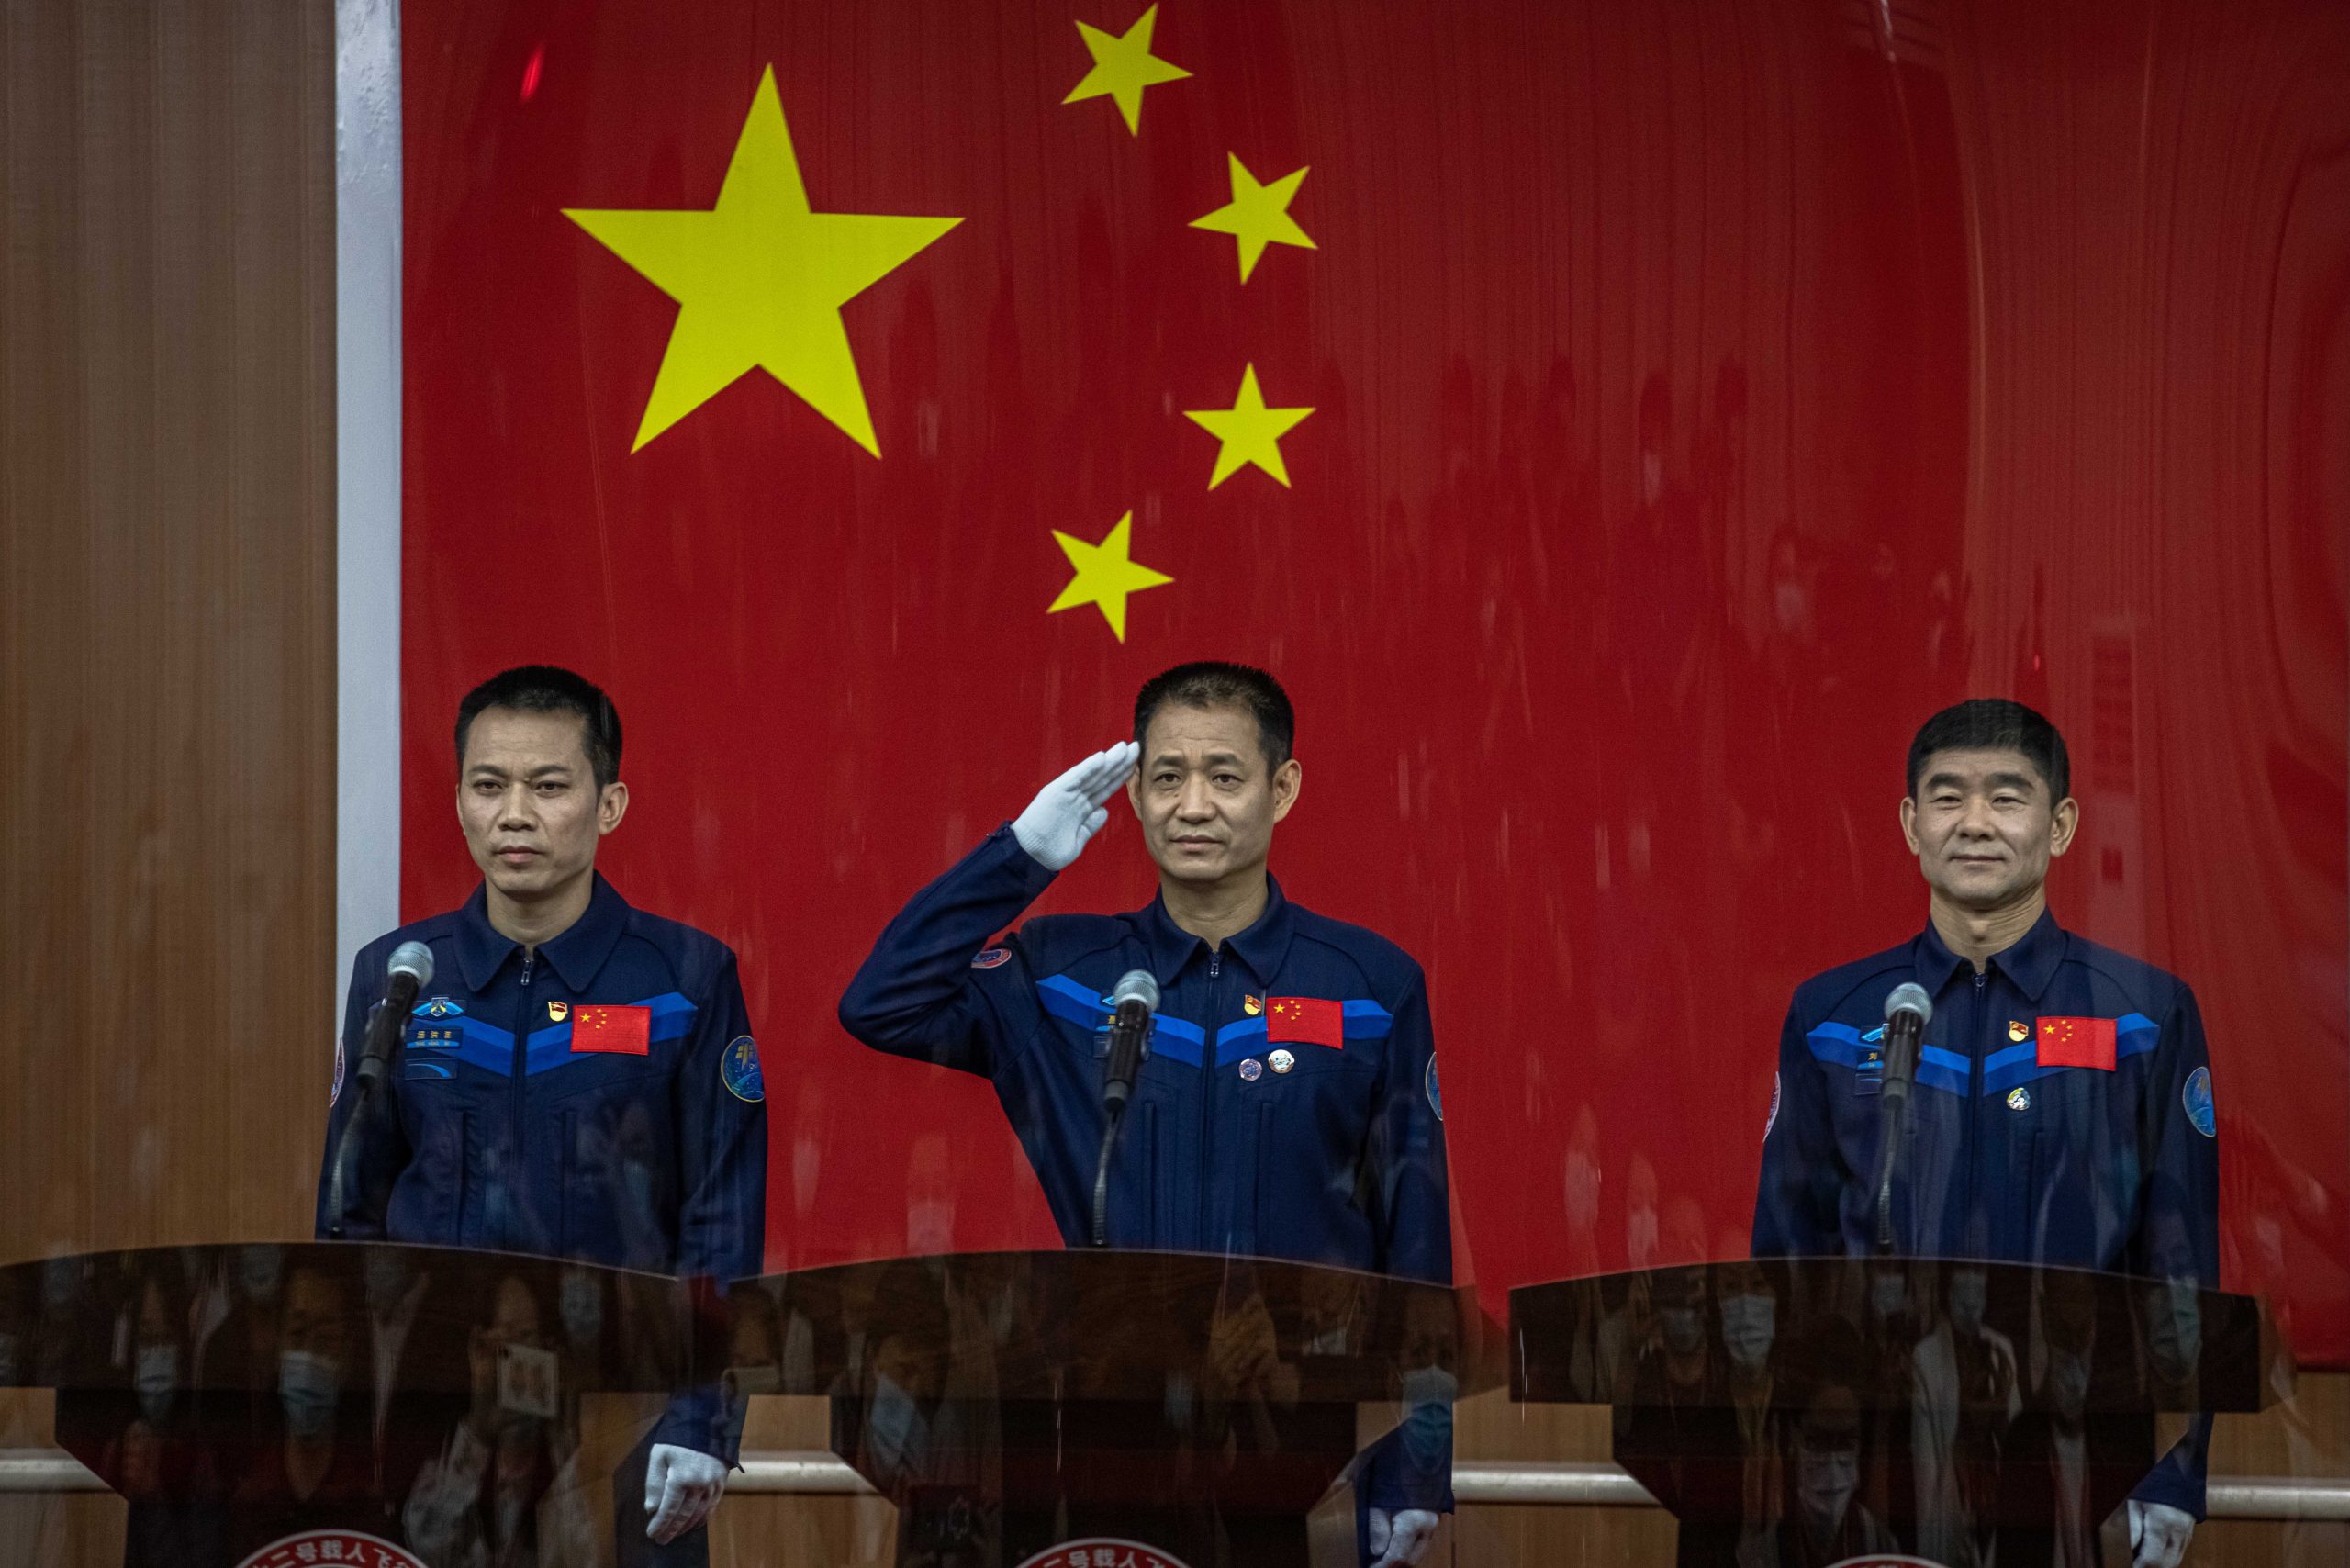 epa09275131 Chinese astronauts (L-R) Tang Hongbo, Nie Haisheng, and Liu Boming participate in a press conference at the Jiuquan Satellite Launch Center, the day before the launching of the Long March-2F carrier rocket, carrying the Shenzhou-12, in northwestern Gansu province, China, 16 June 2021. China will launch the Shenzhou-12 spacecraft carrying three crew members to the orbiting Tianhe core module for a three-month mission on 17 June. It is the first spaceflight in almost five years when China sends humans into space.  EPA/ROMAN PILIPEY